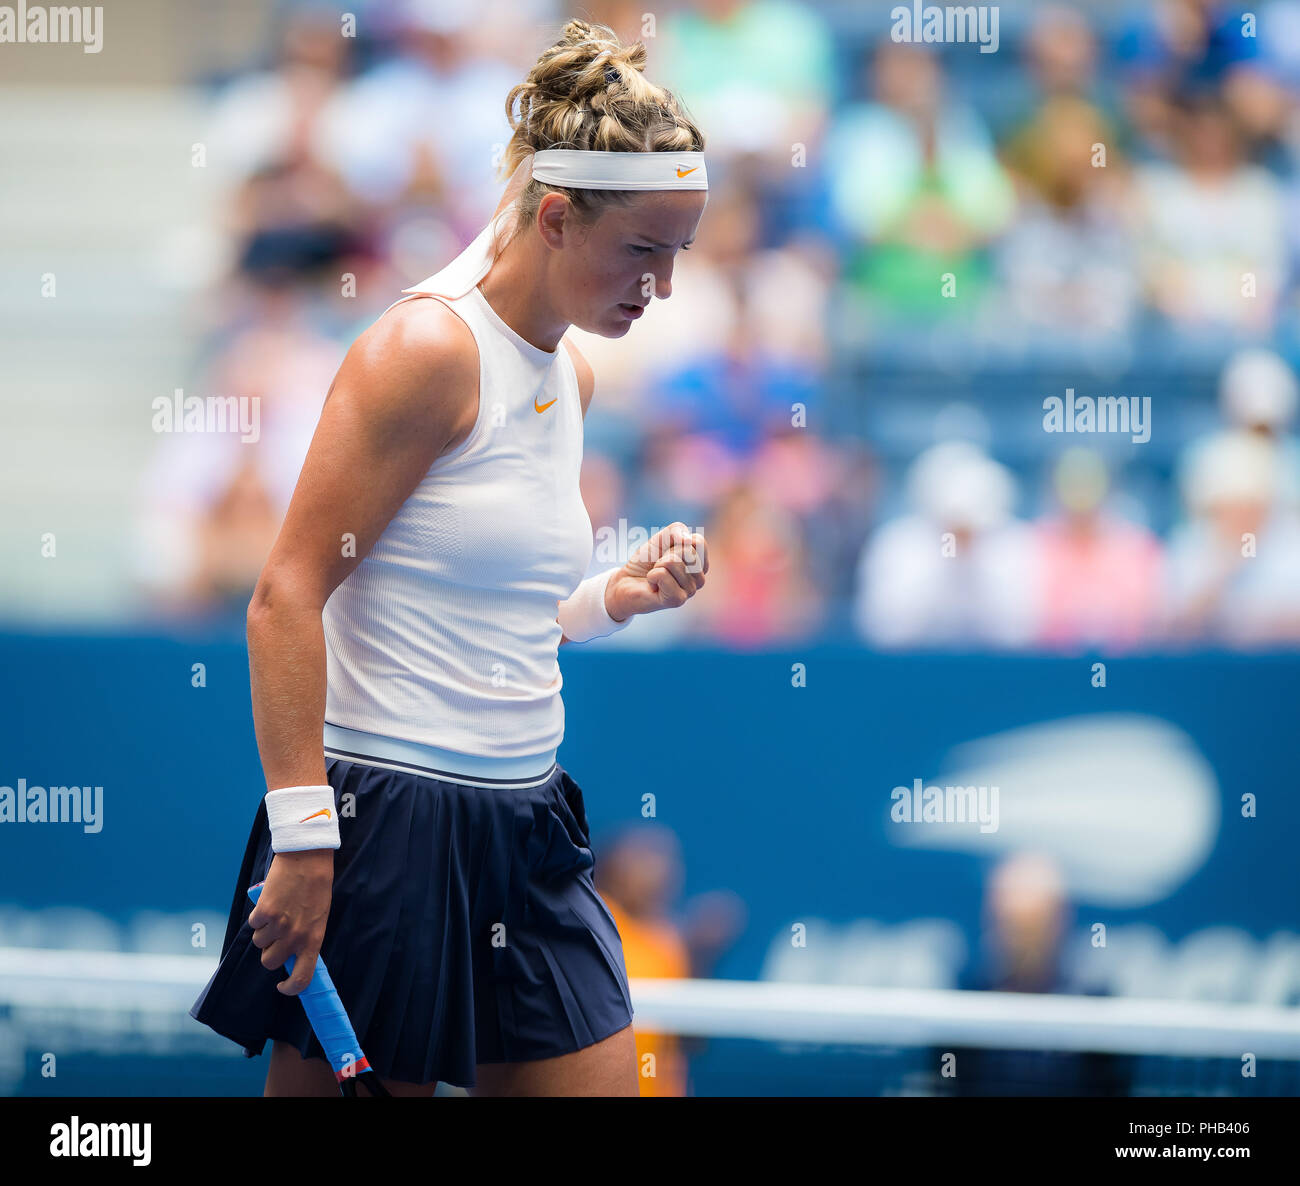 New York, New York, USA. August 31, 2018 - Victoria Azarenka of Belarus in action during her third-round match at the 2018 US Open Grand Slam tennis tournament, New York, USA, August 31th 2018. Credit: AFP7/ZUMA Wire/Alamy Live News Stock Photo